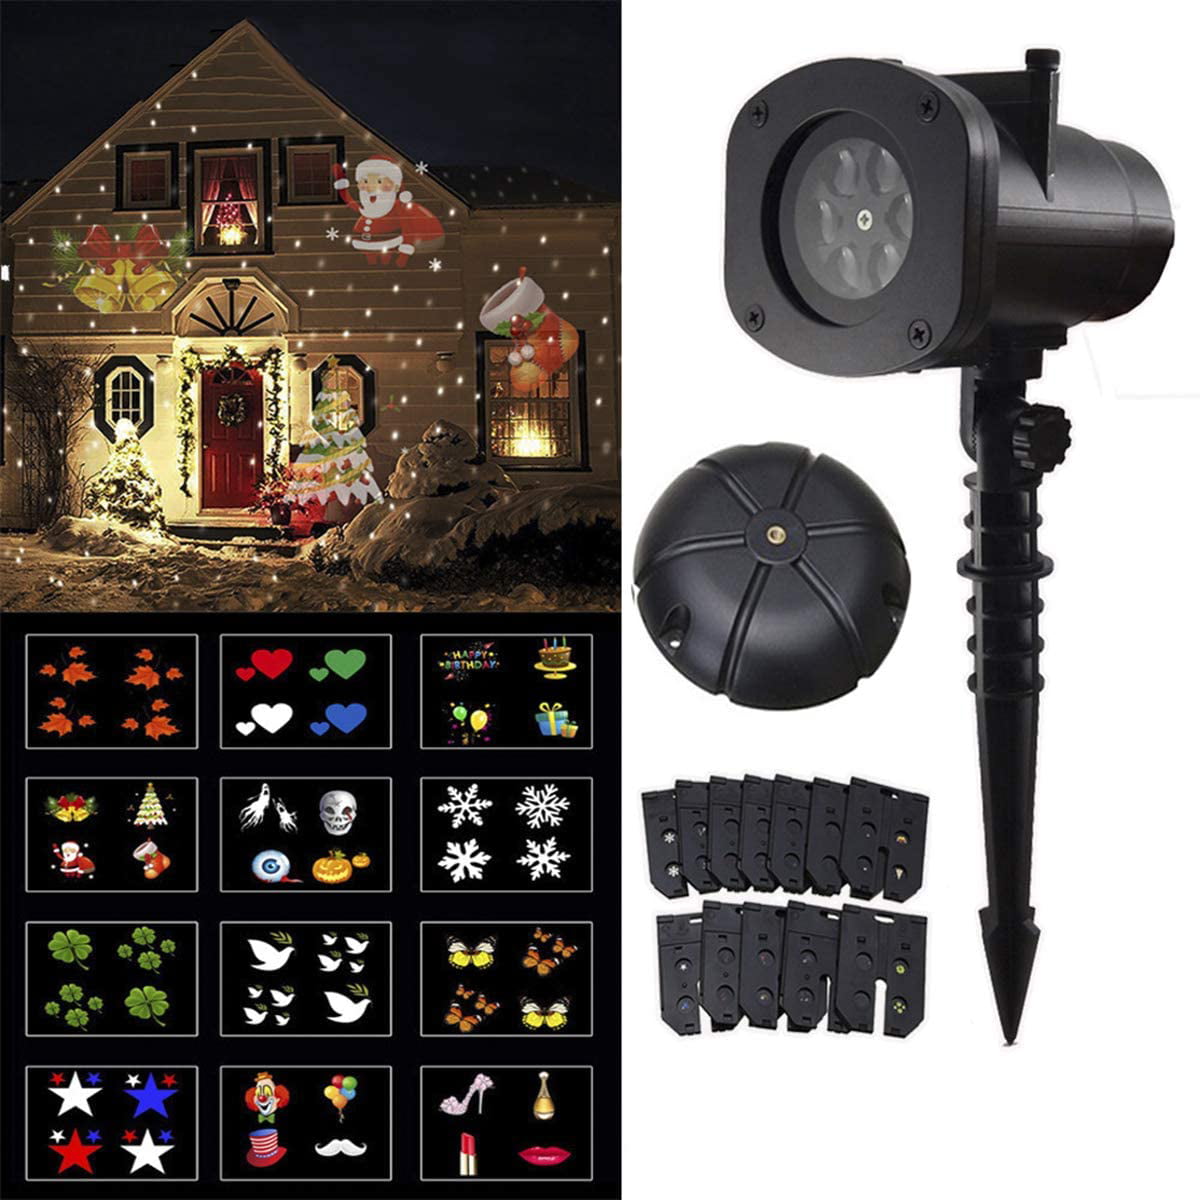 Christmas Projector Light Moving LED Laser Landscape Outdoor Halloween Xmas Lamp